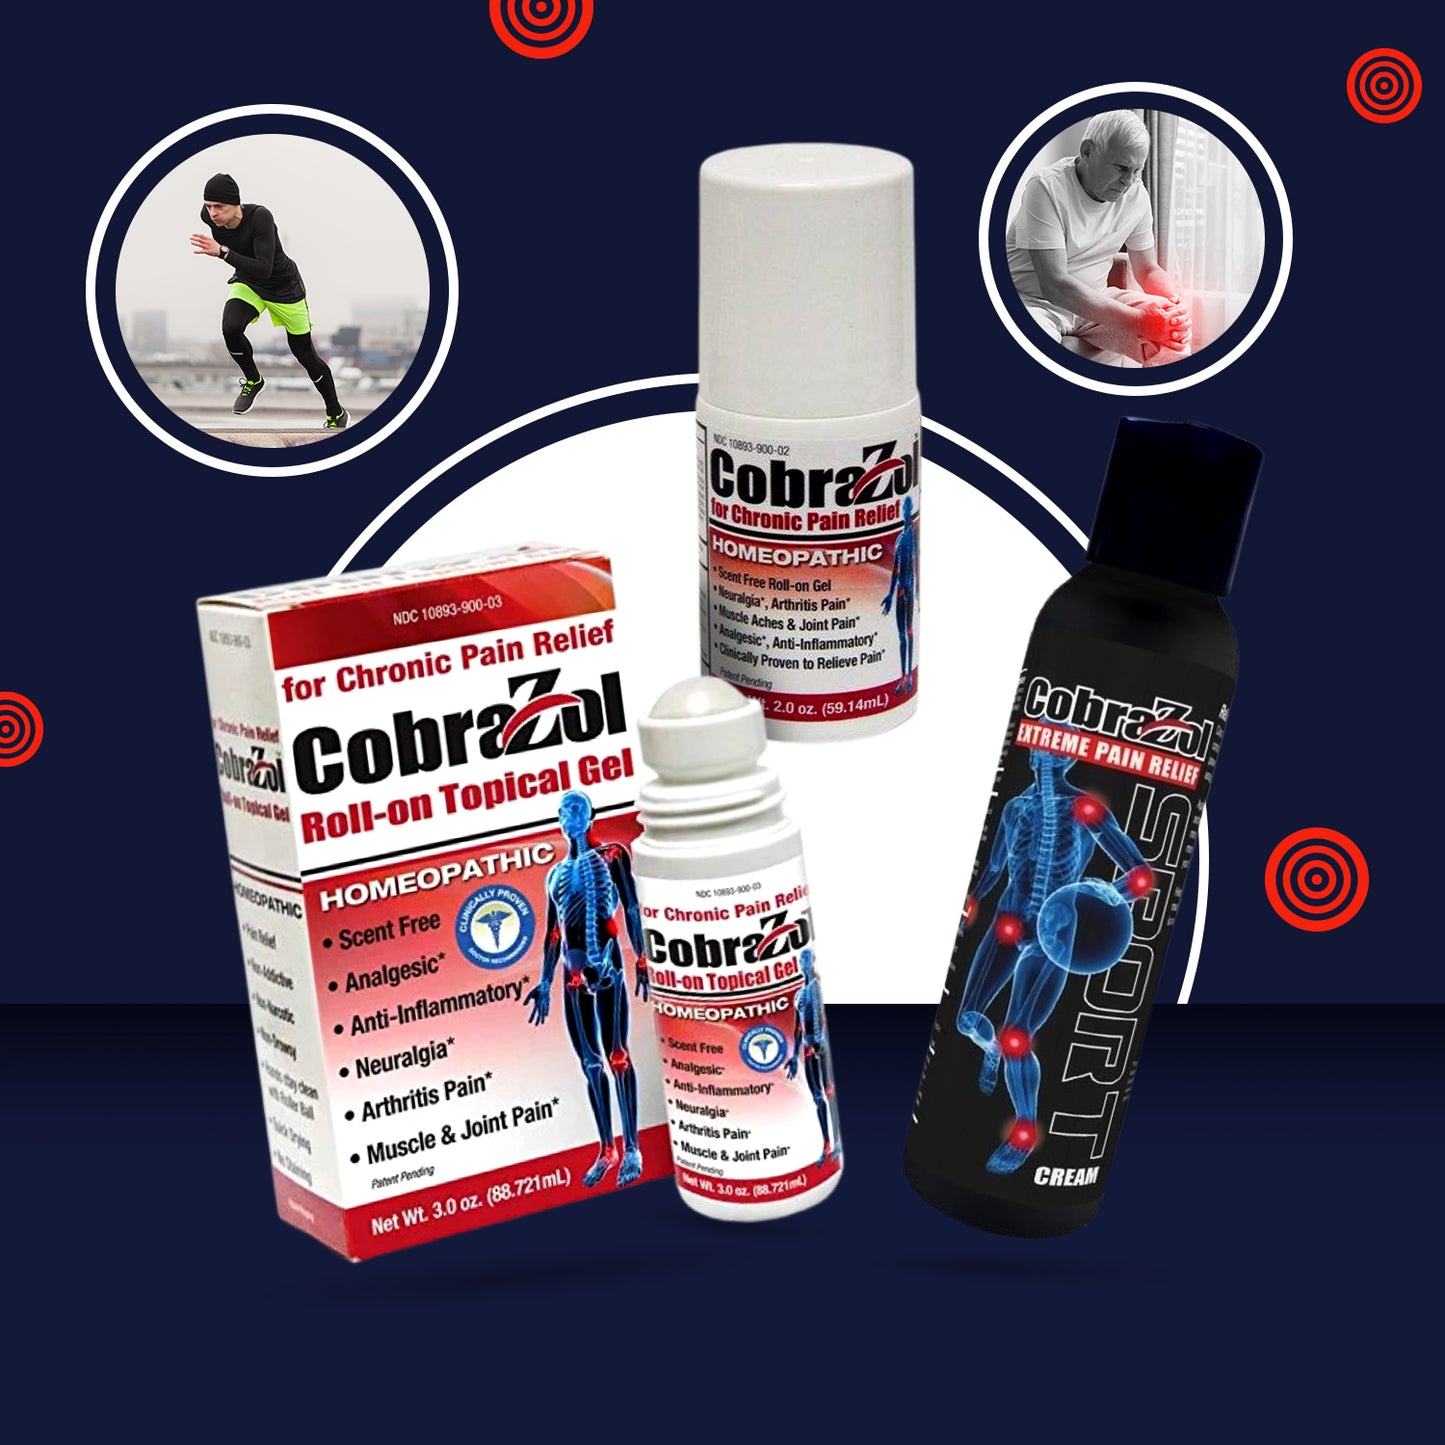 CobraZol™ for Clinically Proven Chronic Pain Relief | Clinically Proven | 3 oz Topical Roll-On Gel